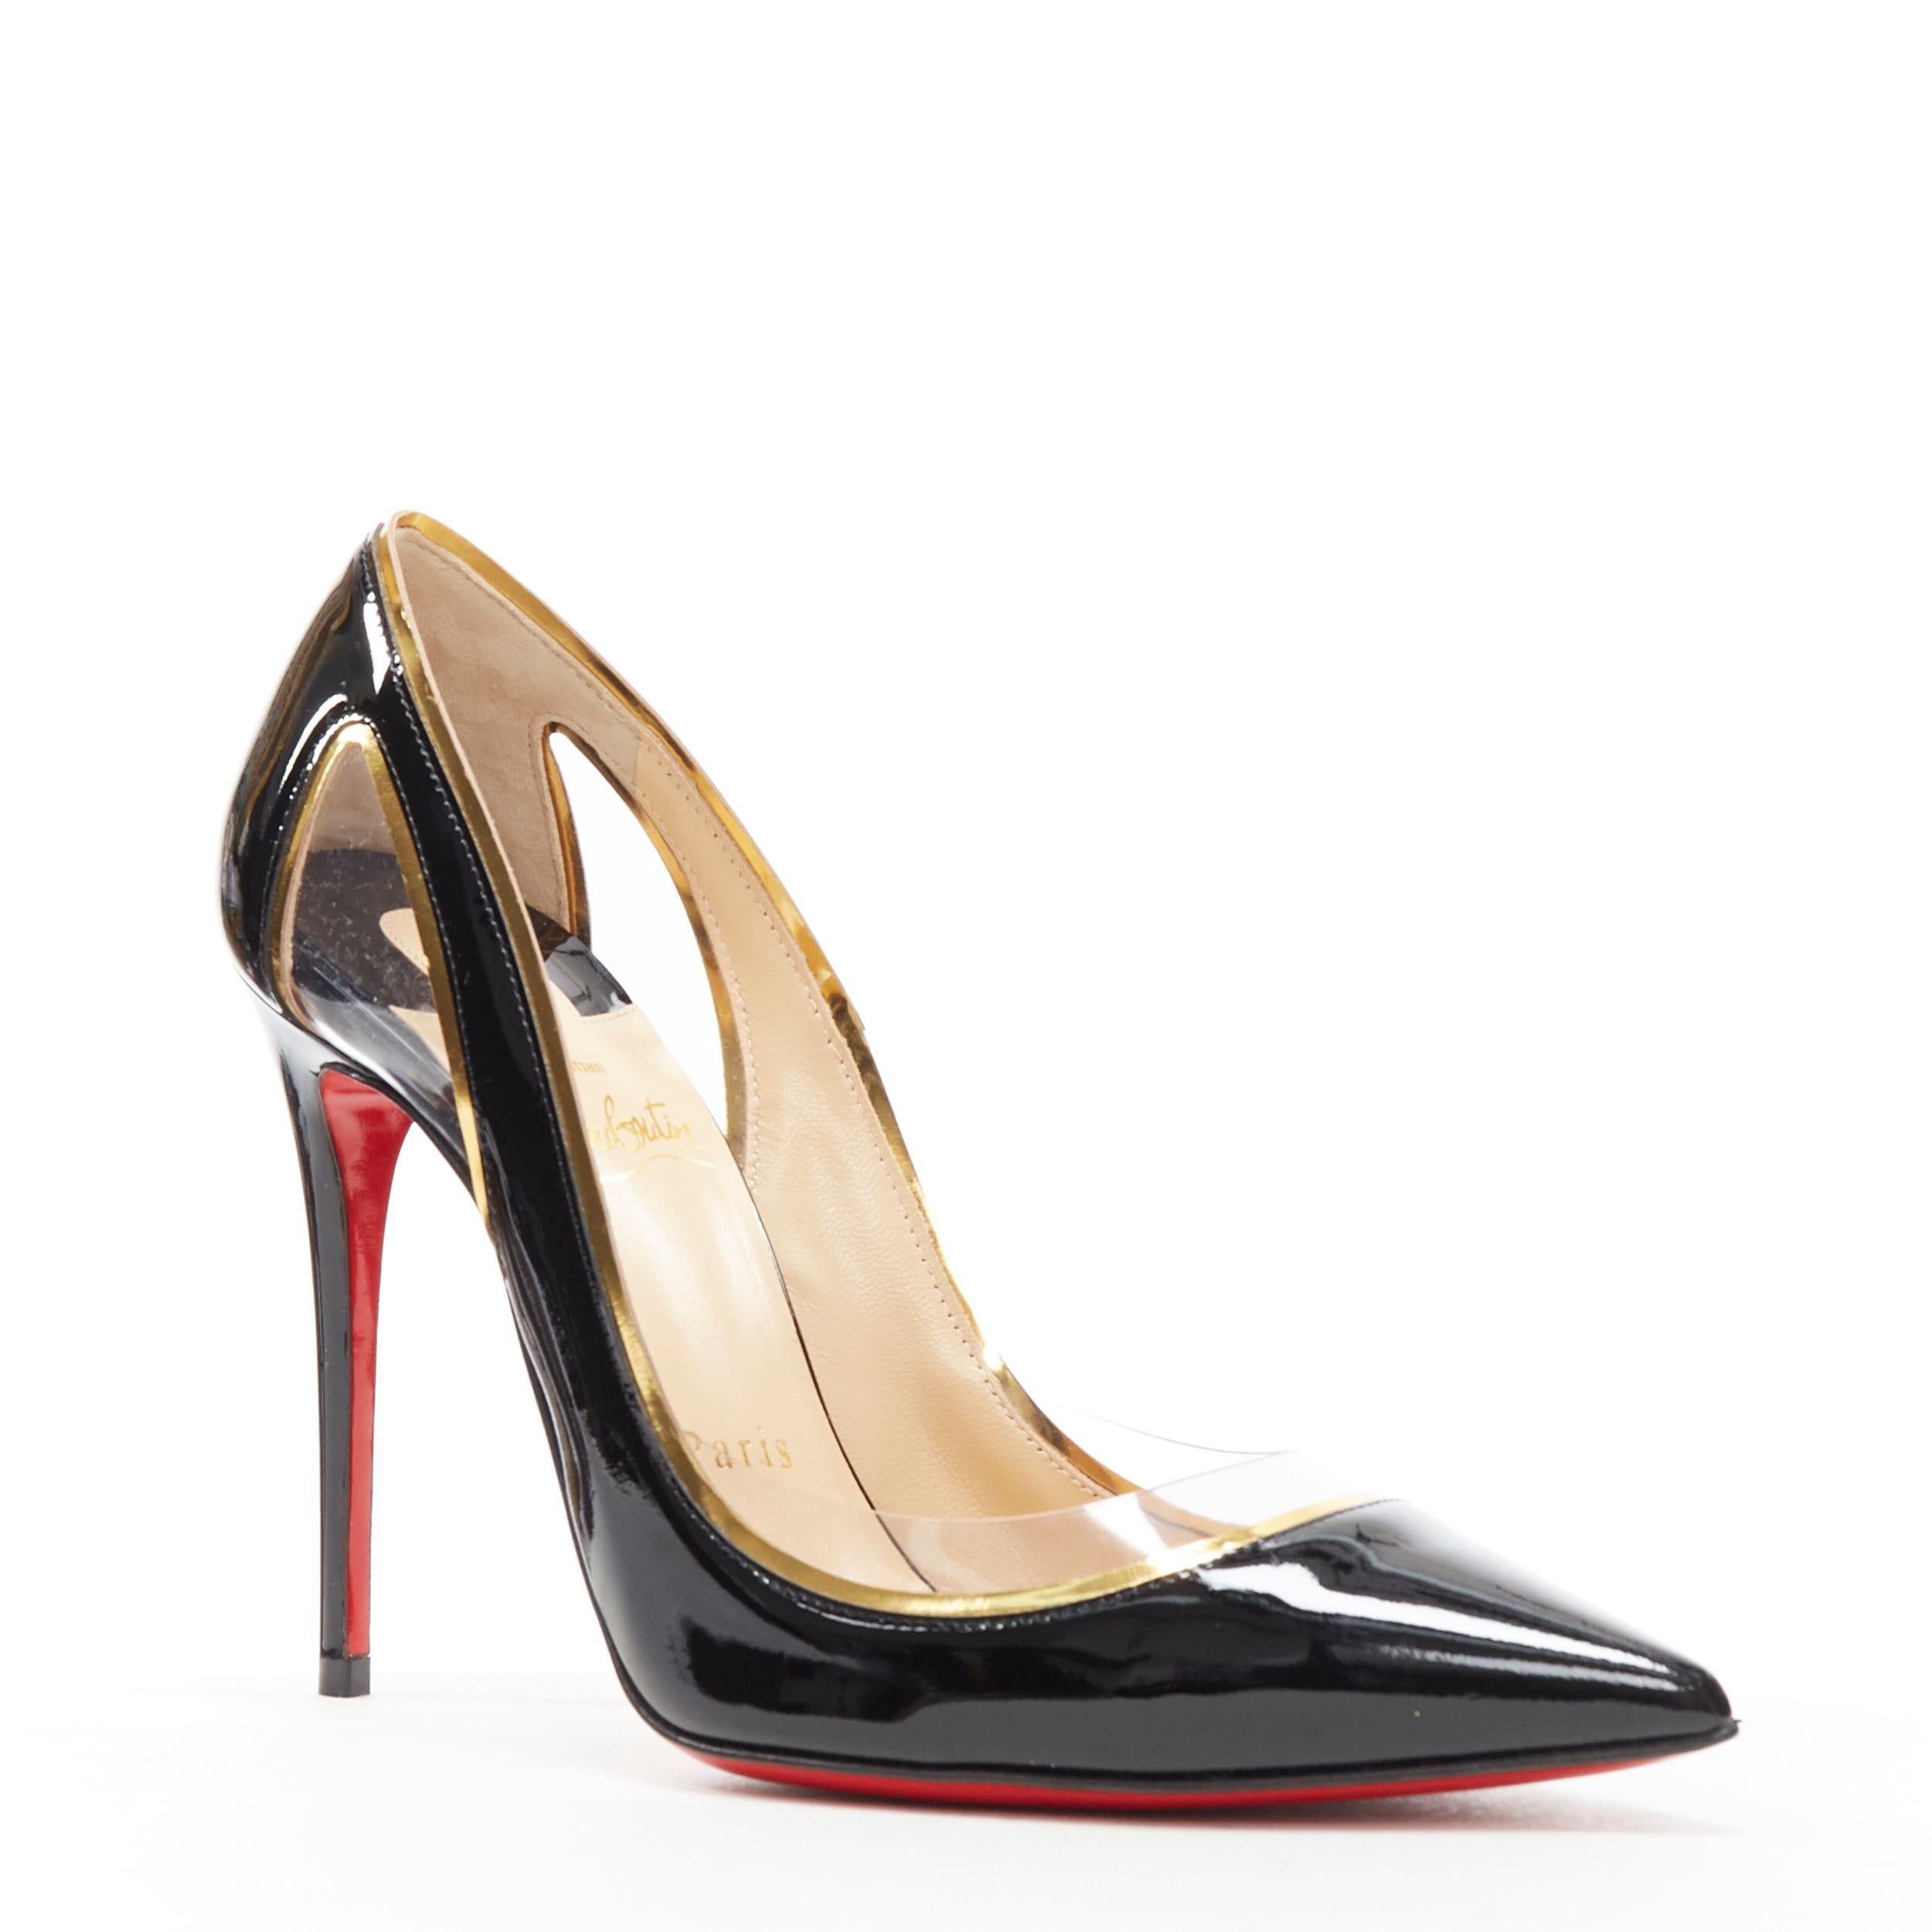 new CHRISTIAN LOUBOUTIN Cosmo 554 black patent PVC trimmed pigalle pump EU38
Brand: Christian Louboutin
Designer: Christian Louboutin
Model Name / Style: Cosmo 554
Material: Patent leather
Color: Black
Pattern: Solid
Extra Detail: Style code: